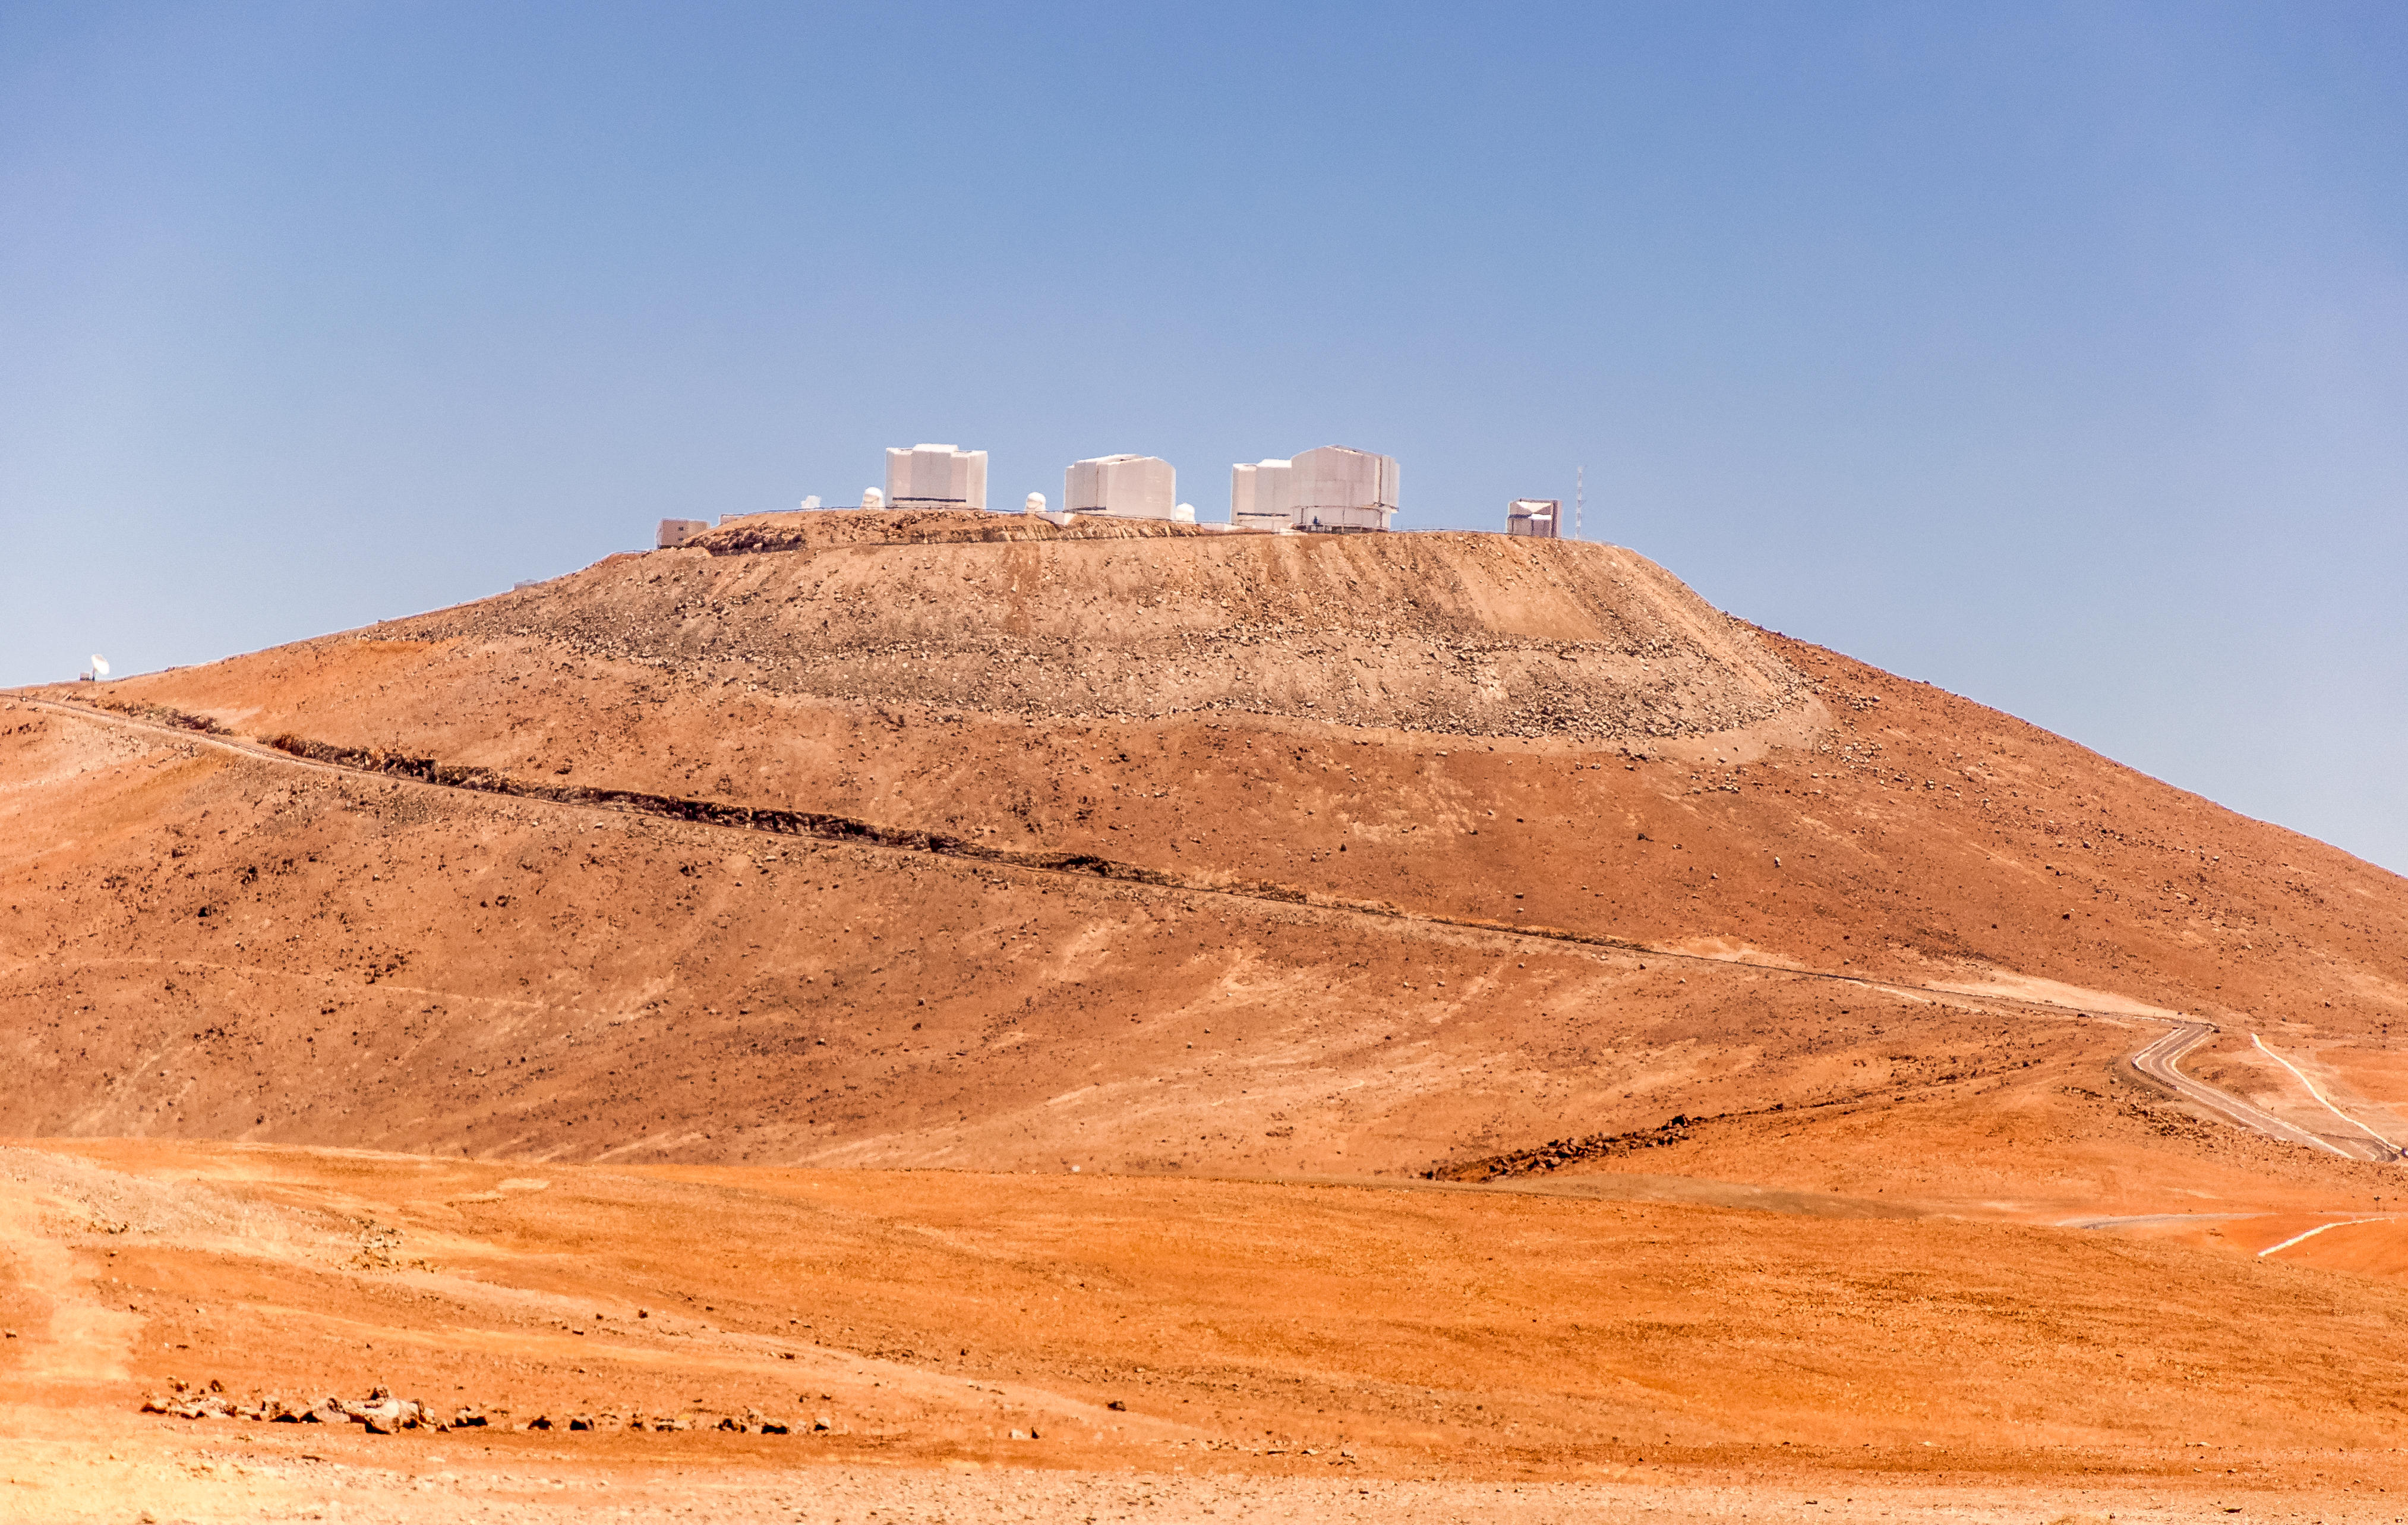 The Very Large Telescope in Chile